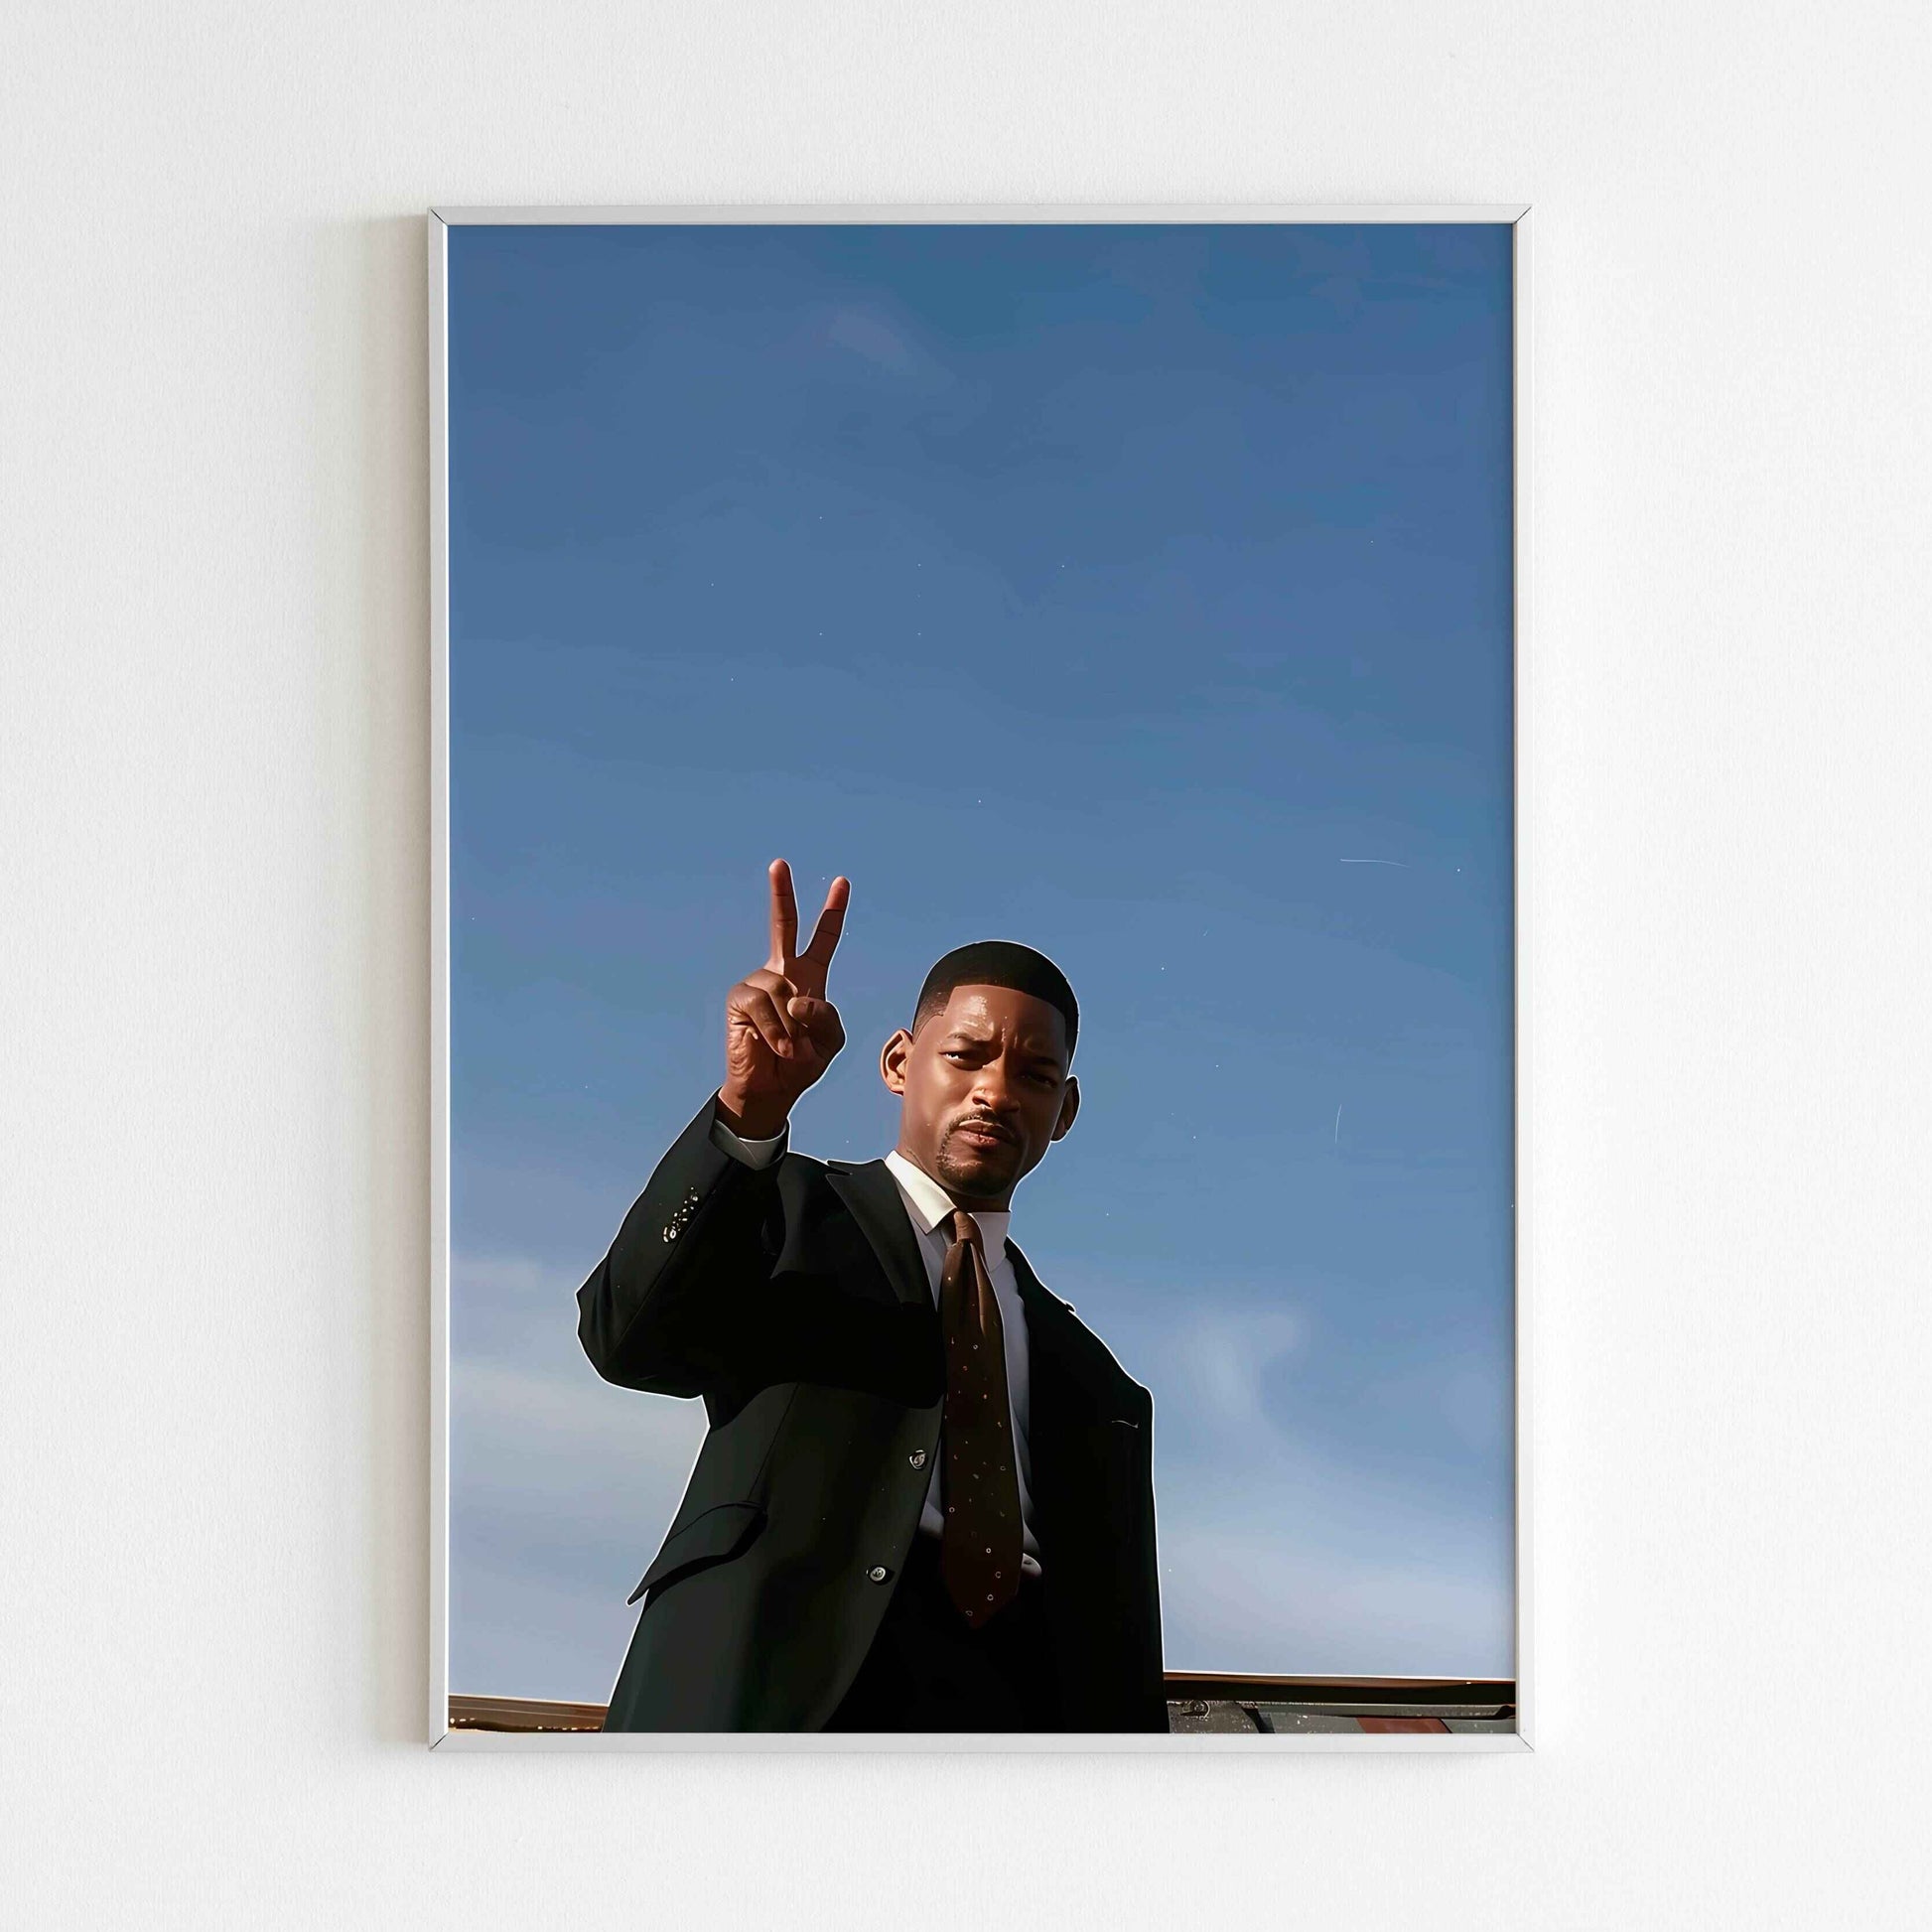 Enjoy another portrait of Will Smith with a Will Smith(2 of 2) portrait printable poster (physical or digital)